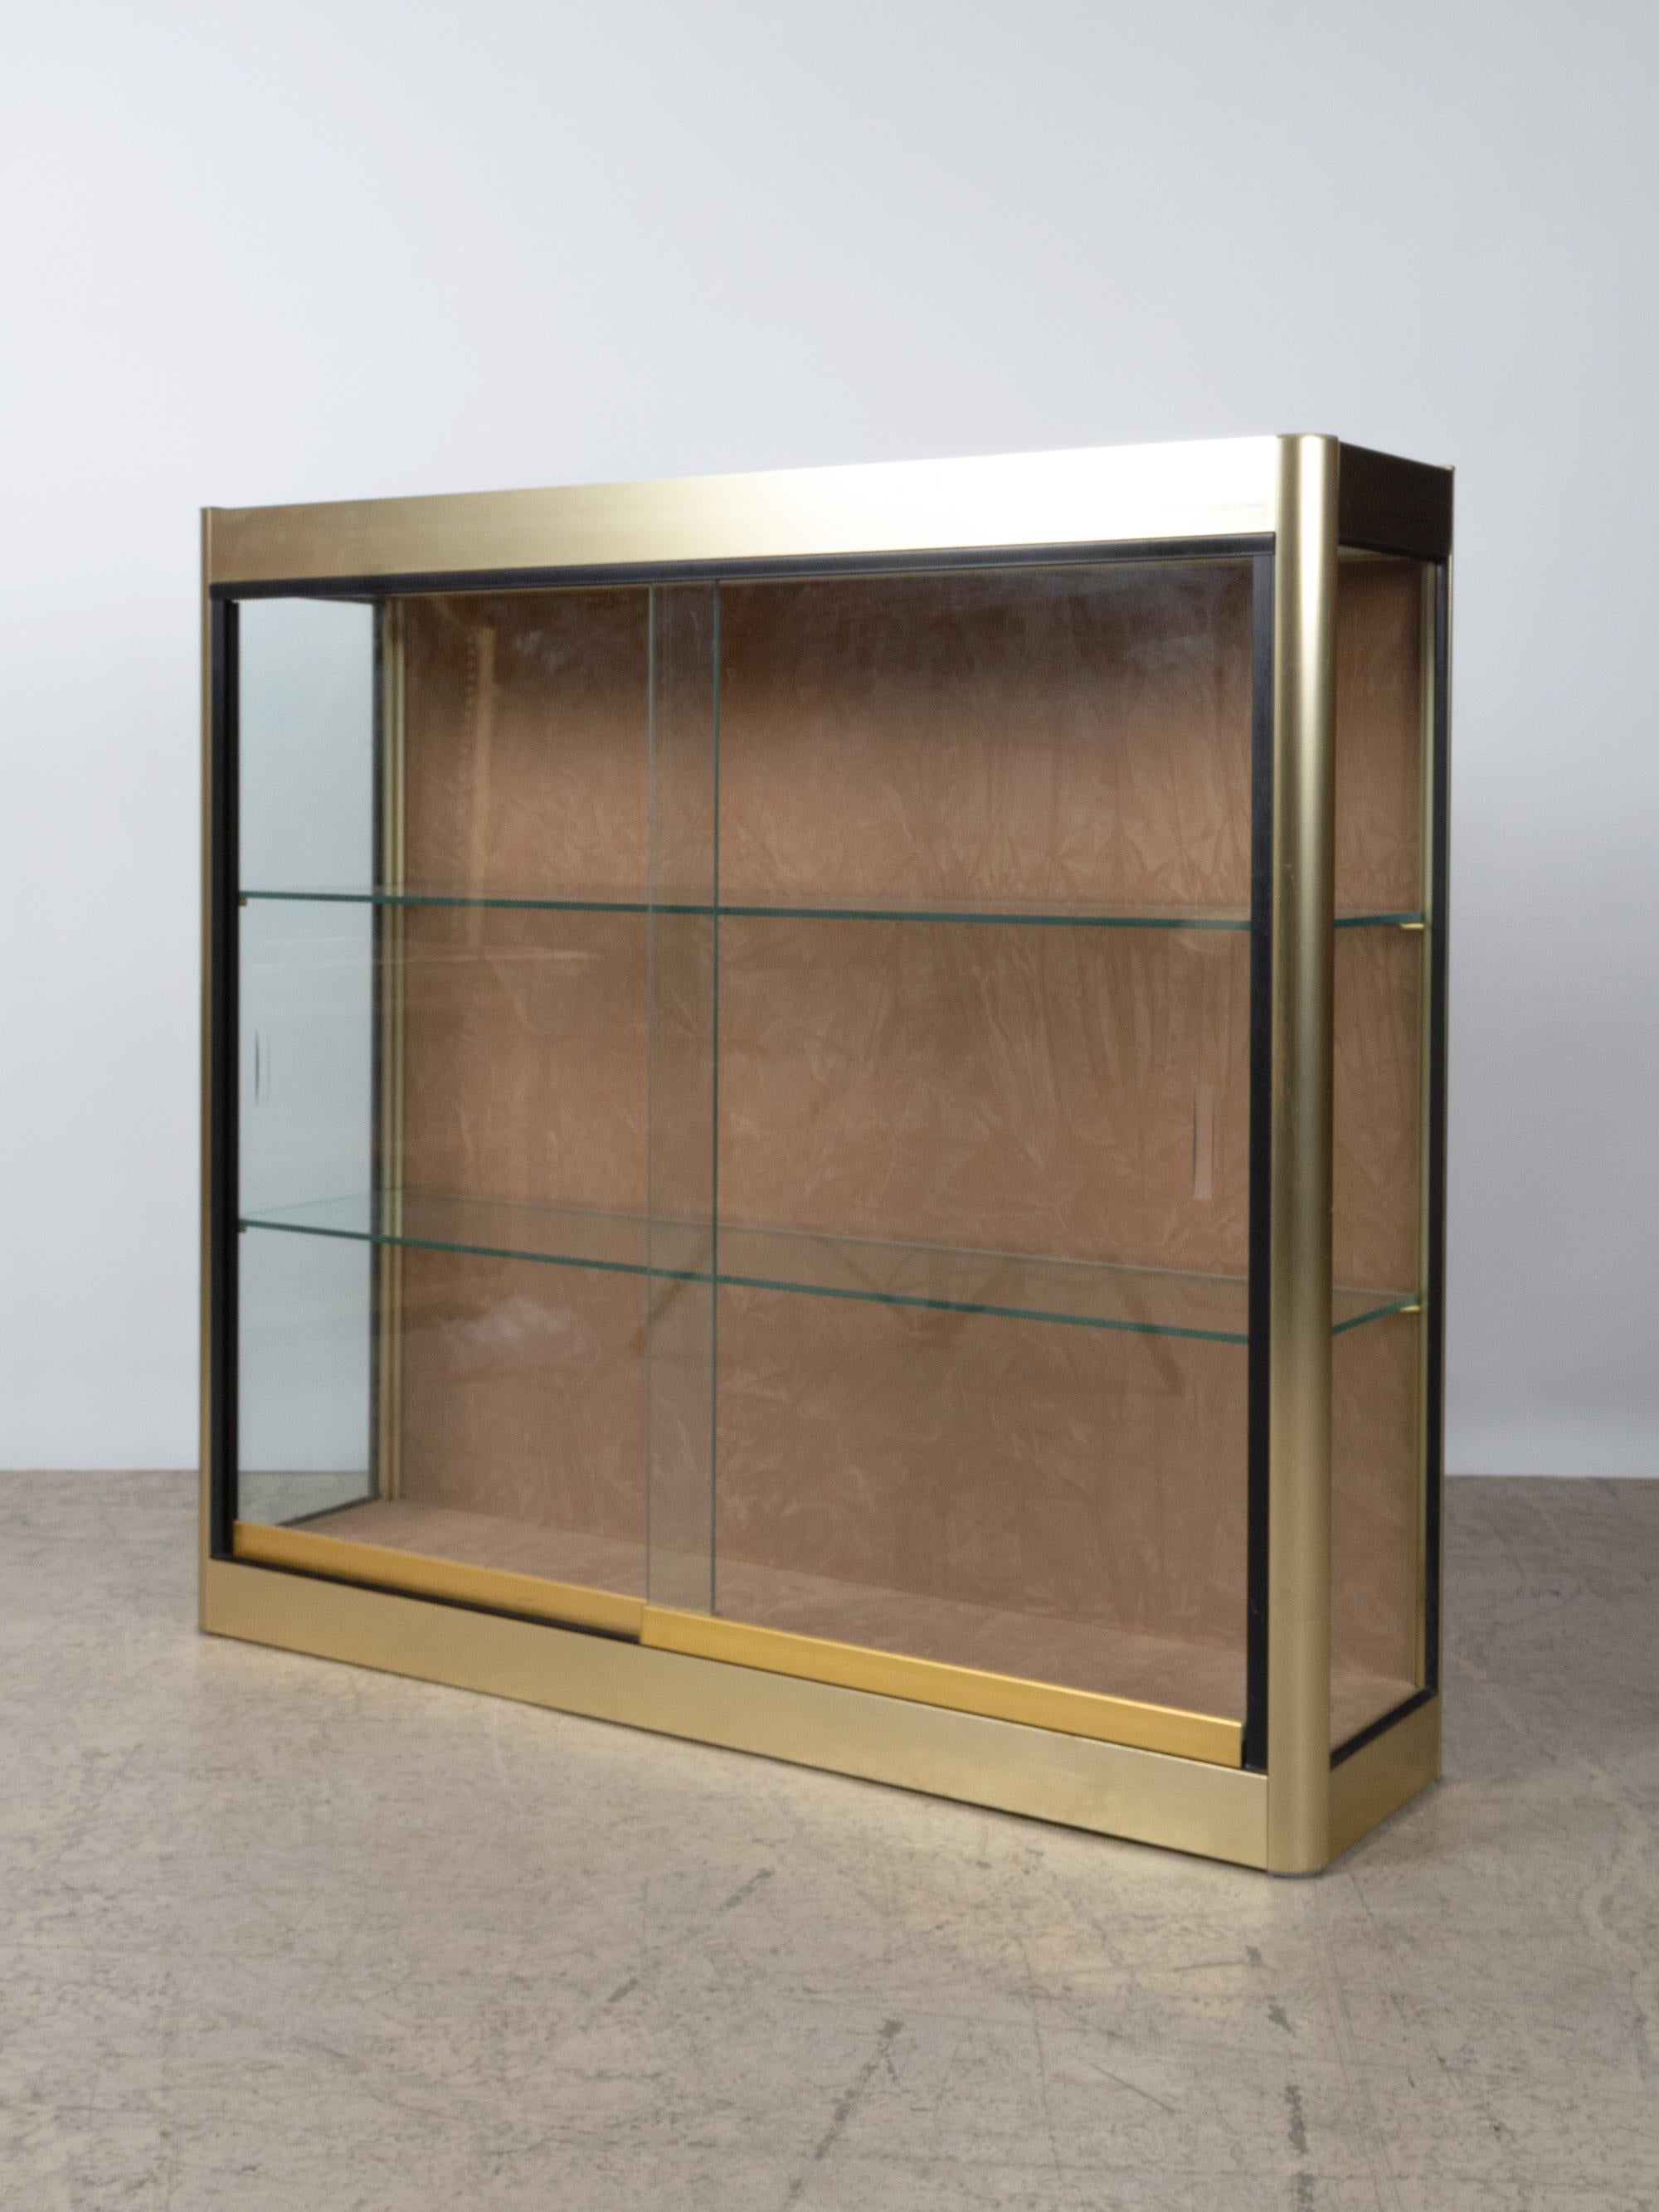 Italian gold-plated aluminium vitrine with two tempered glass shelves, and sliding glass doors.
Excellent vintage condition commensurate of age.